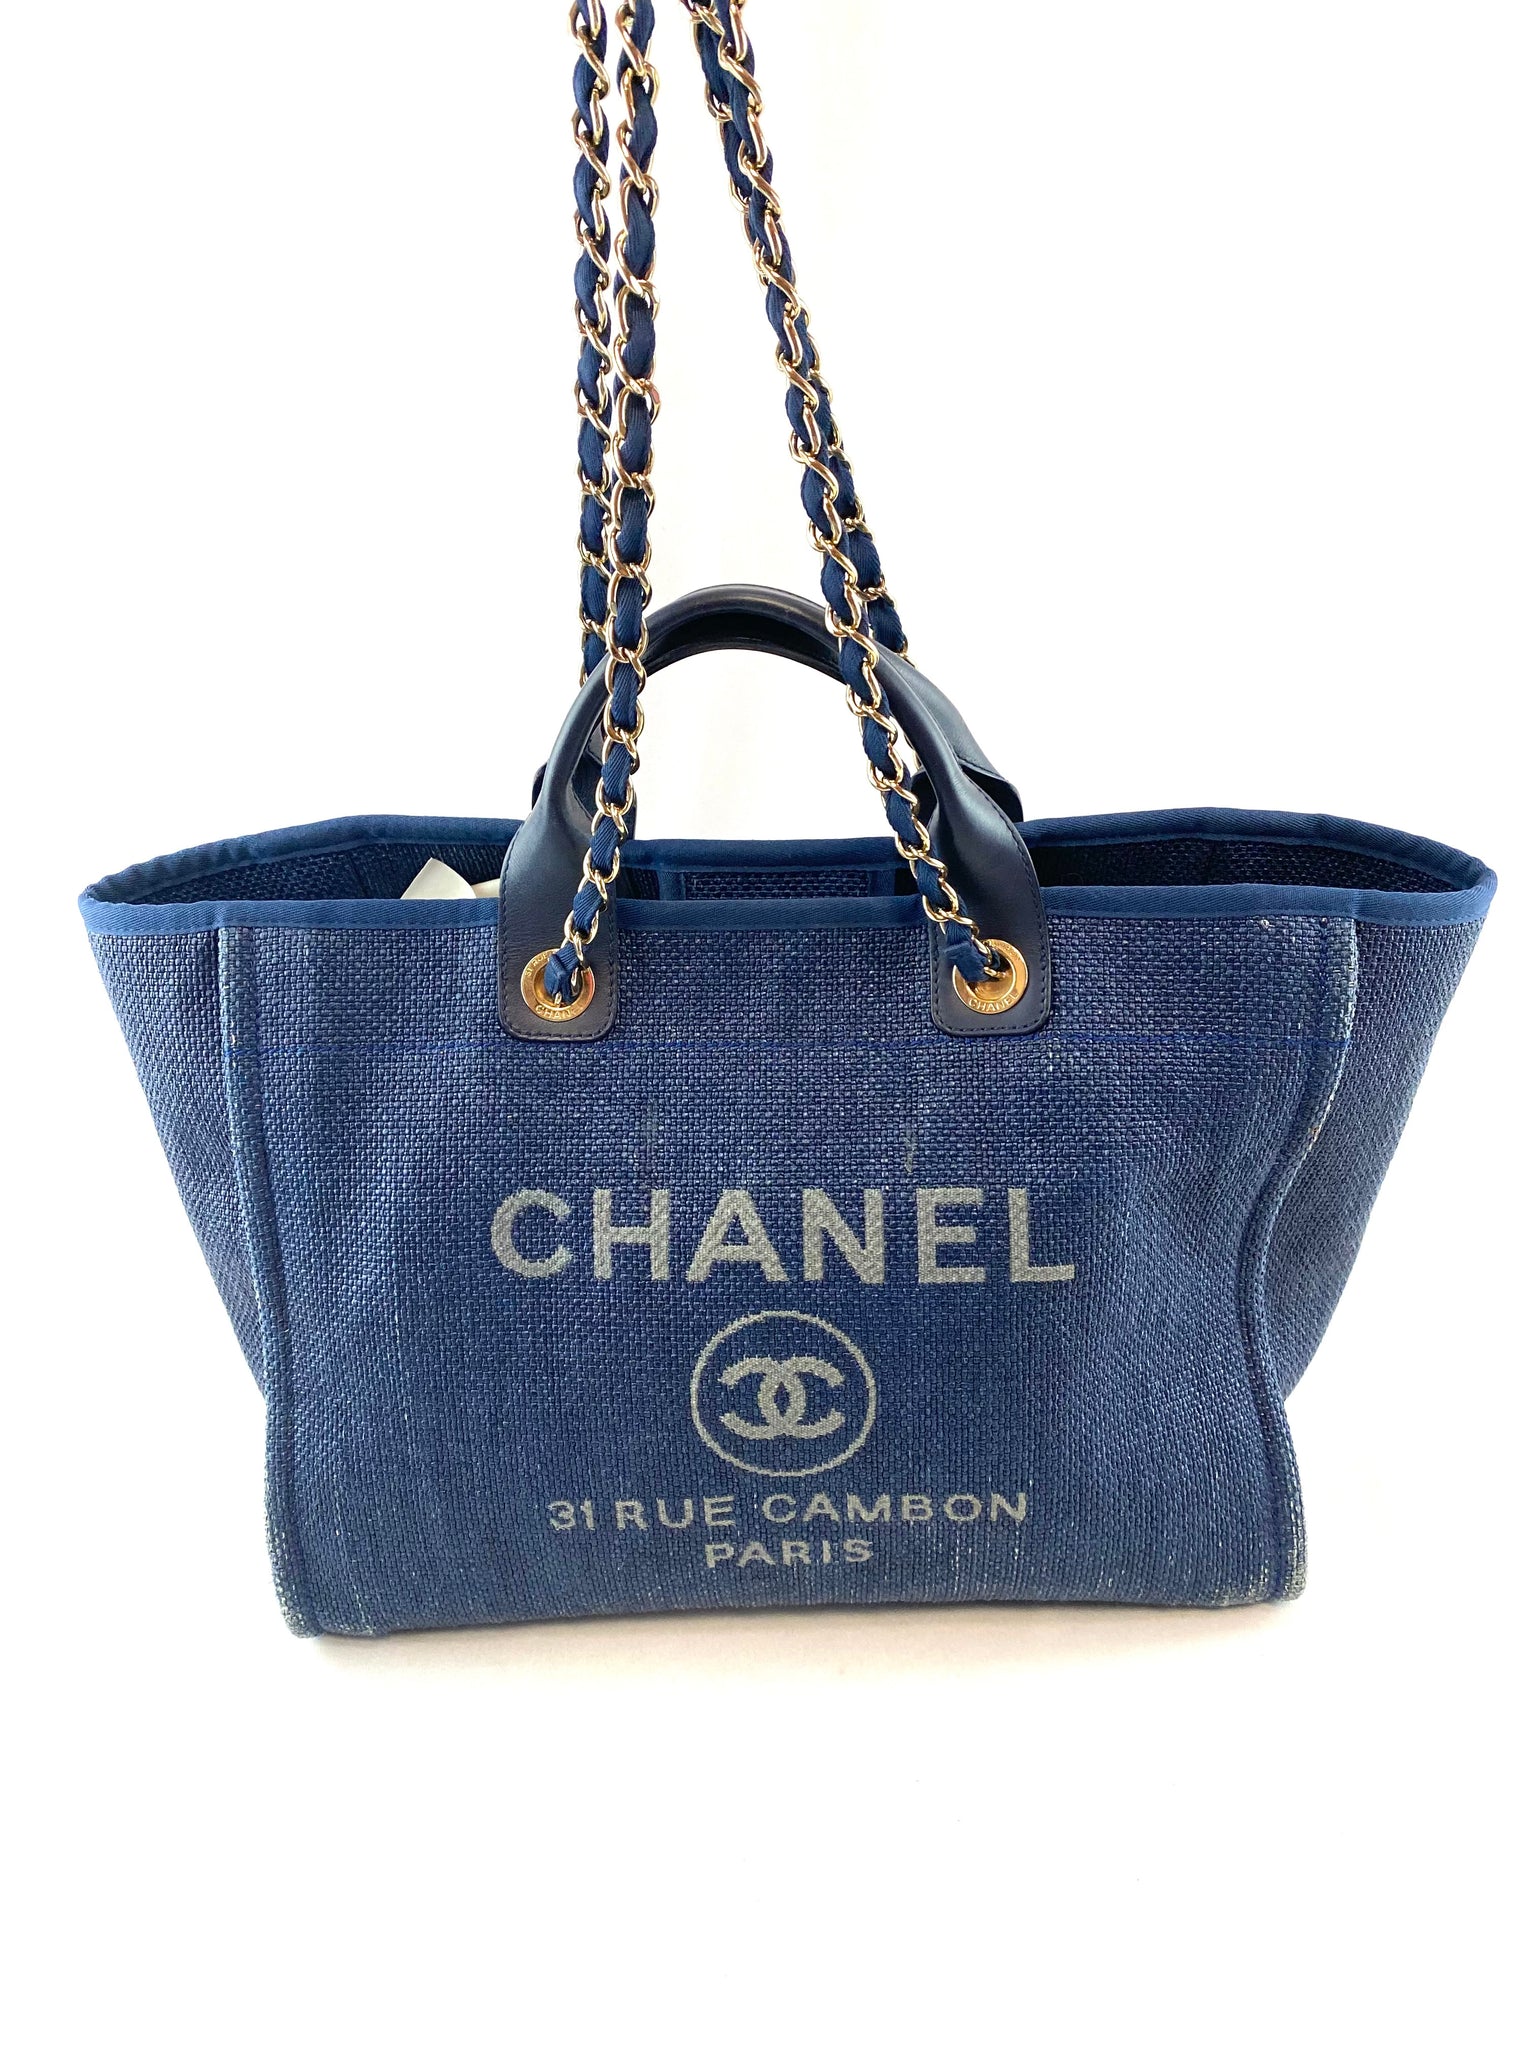 Chanel Deauville Shopping Tote